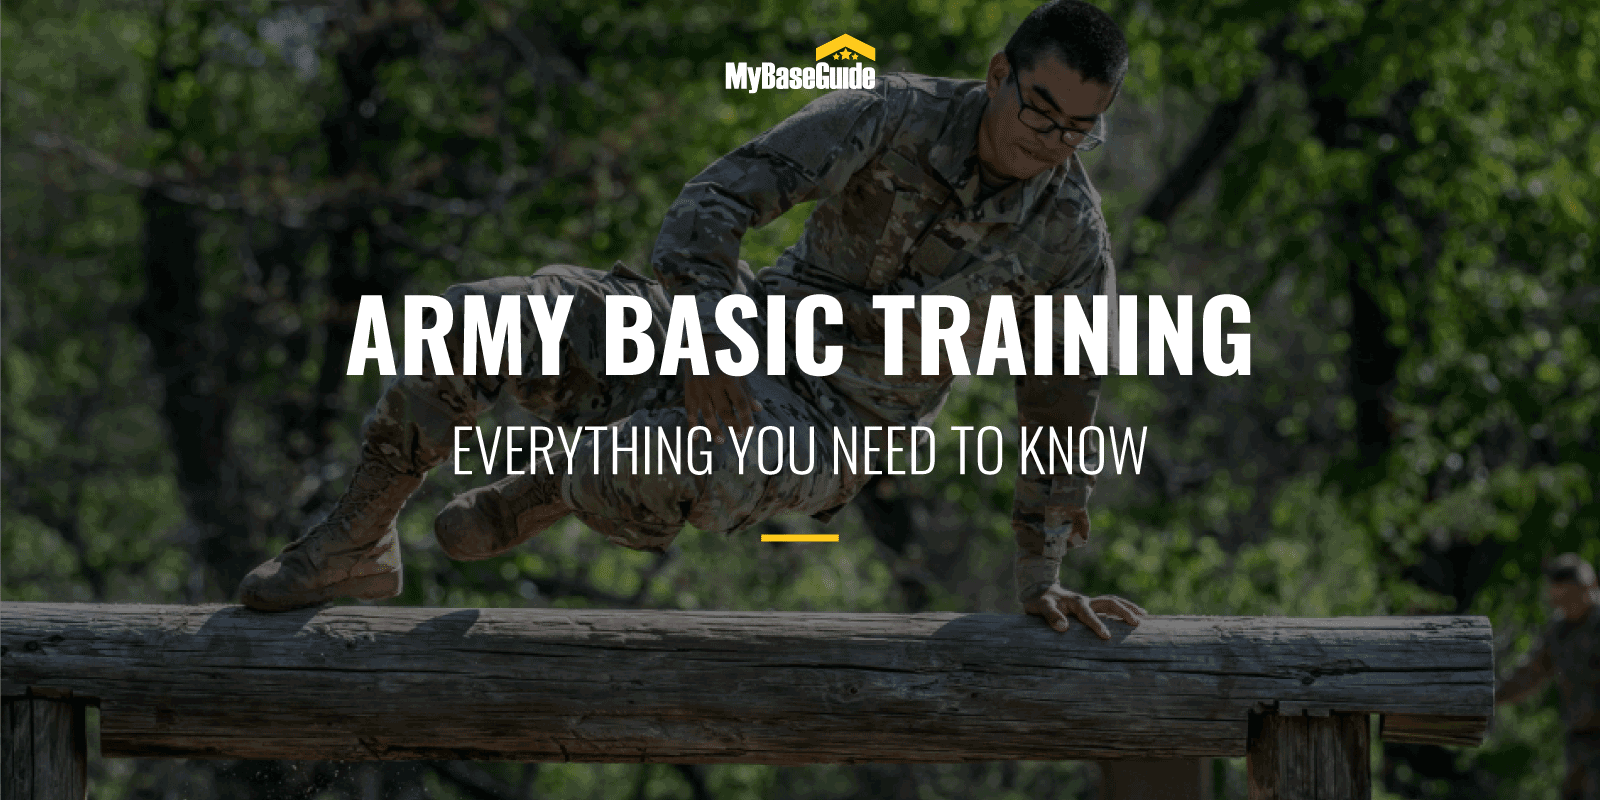 My Base Guide - Army Basic Training: Everything You Need to Know